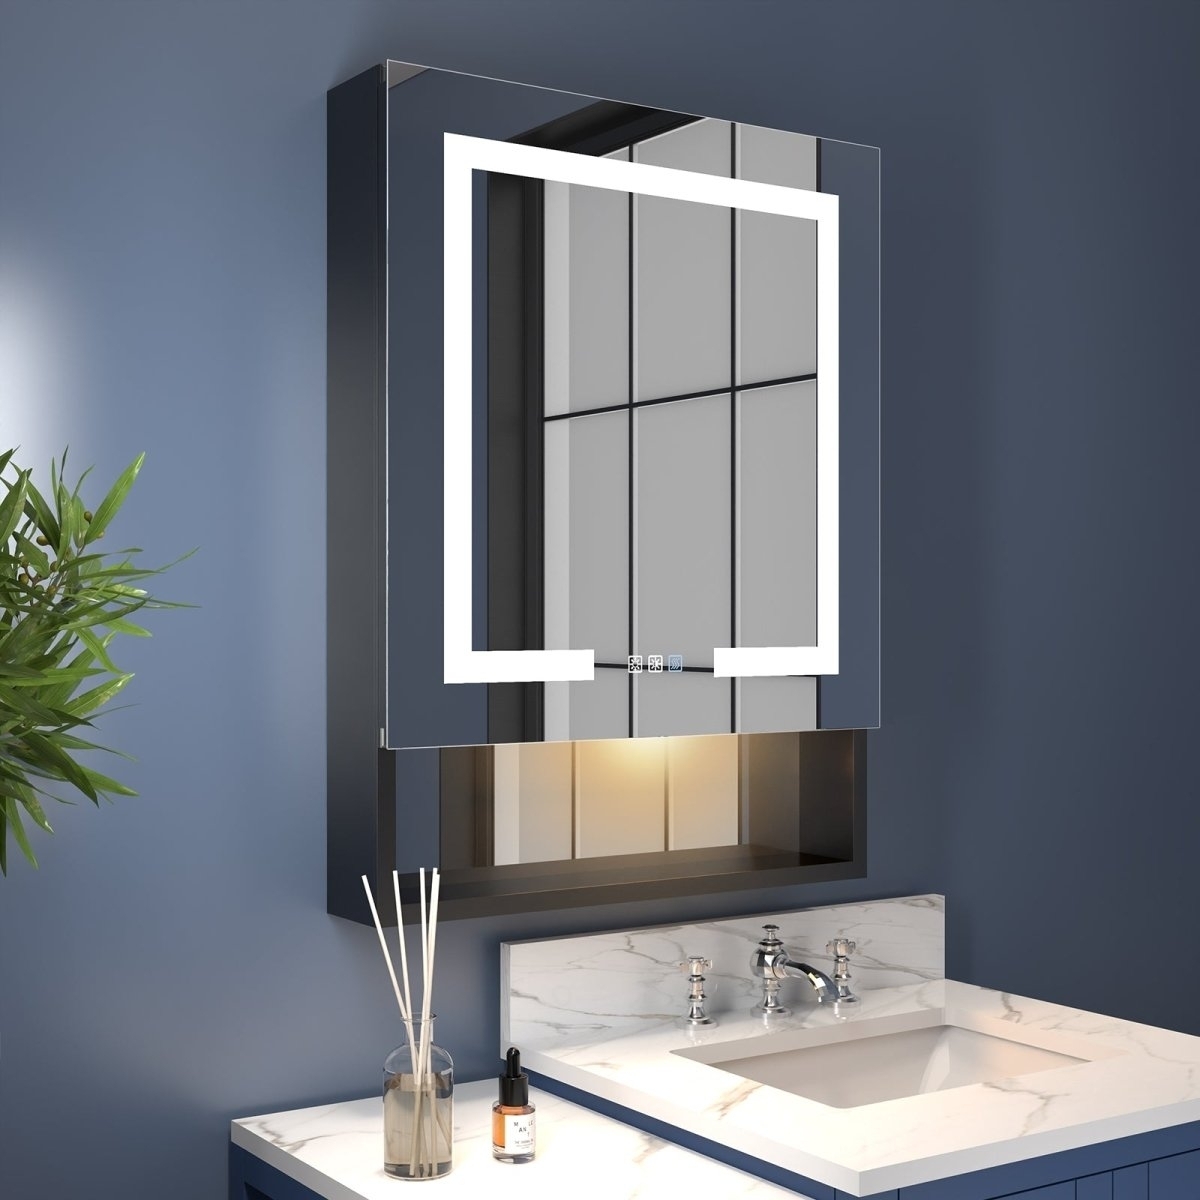 Ample 24 W X 32 H Lighted Black Medicine Cabinet Bathroom Medicine Cabinet With Double Sided Mirror And Lights - Door Left Open